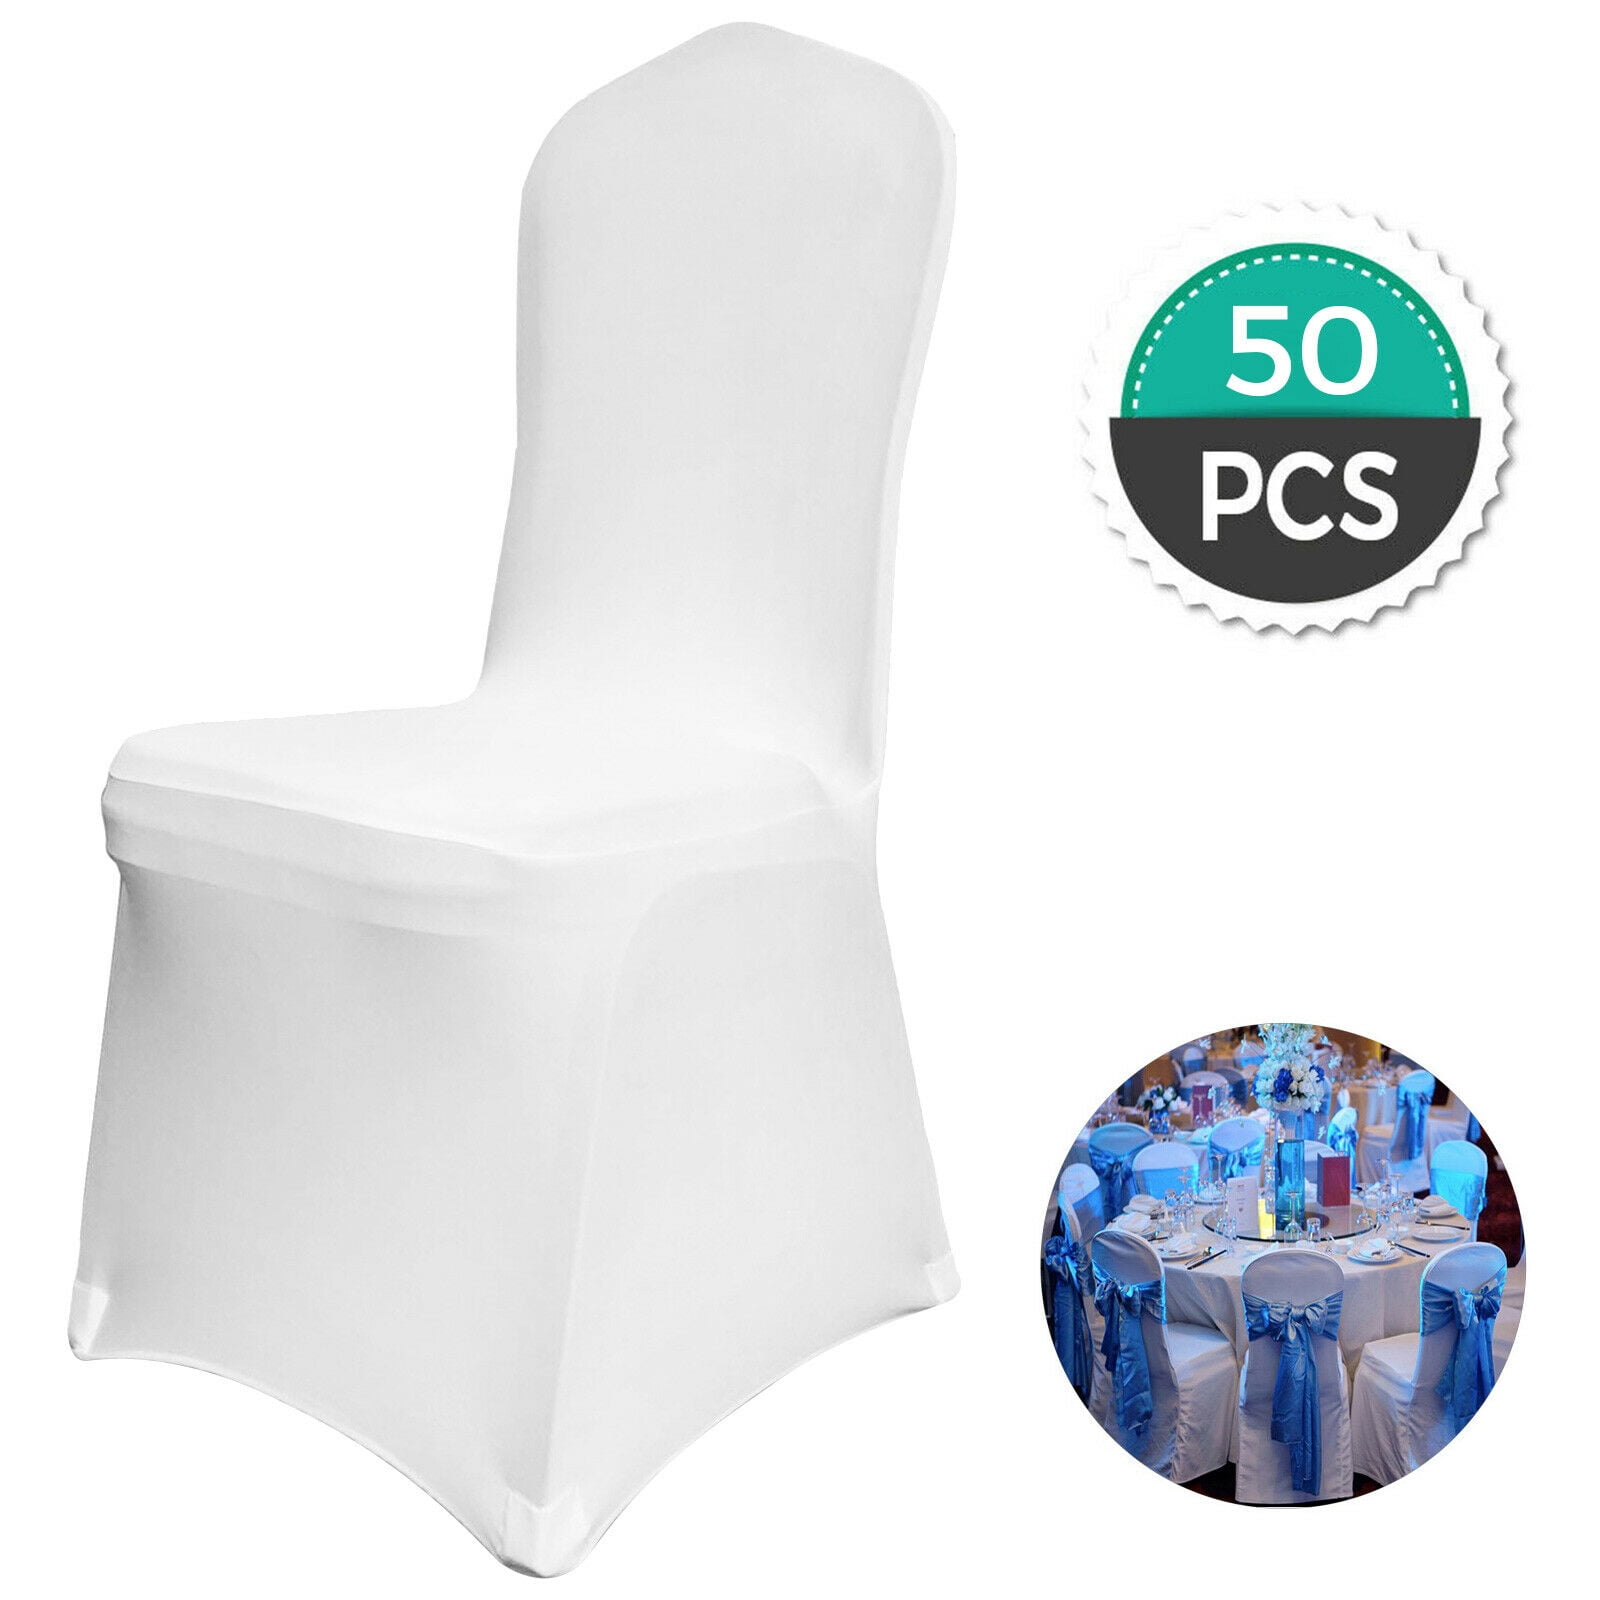 Modern White Chair Covers Walmart for Simple Design